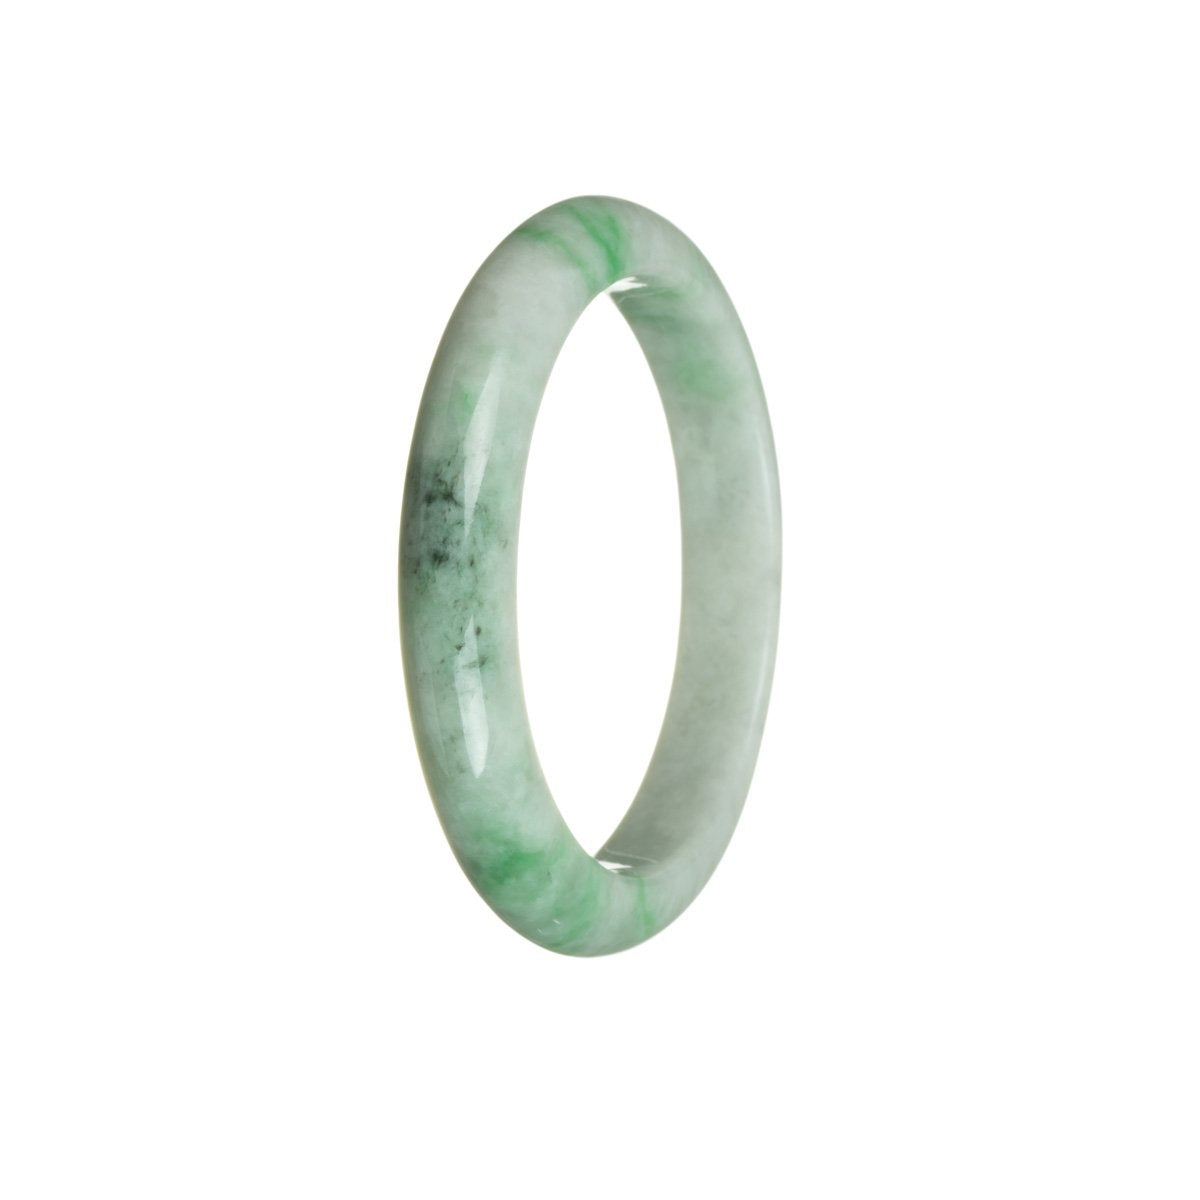 A close-up image of a half-moon shaped white with green jadeite bracelet, measuring 55mm. The jadeite appears to be untreated and certified, making it a unique and valuable piece of jewelry. The brand name "MAYS" is also mentioned.